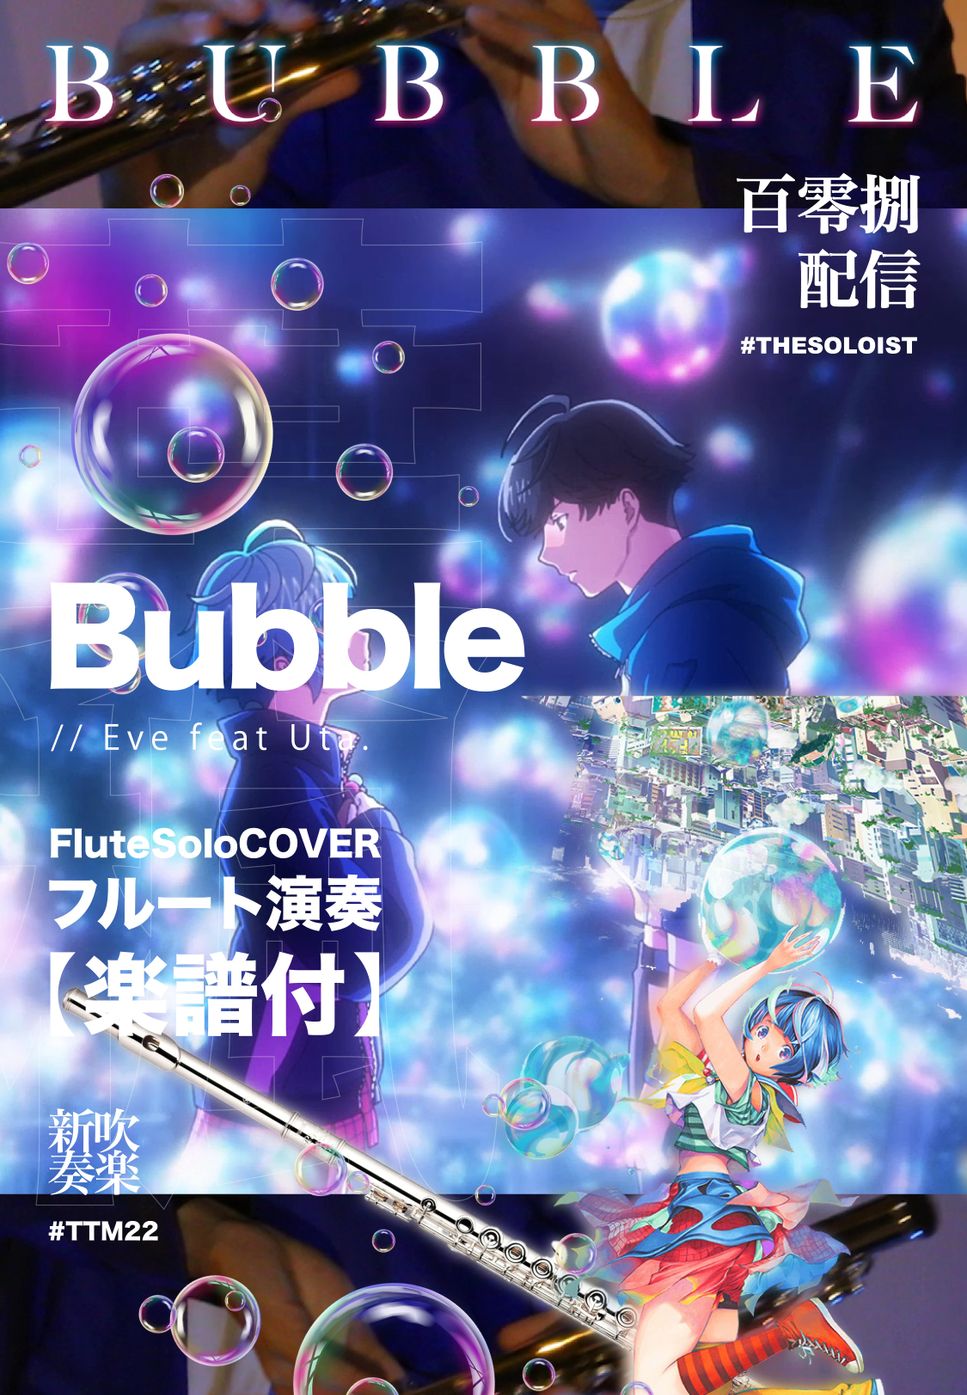 bubble - Bubble (フルート演奏) by Fungyip